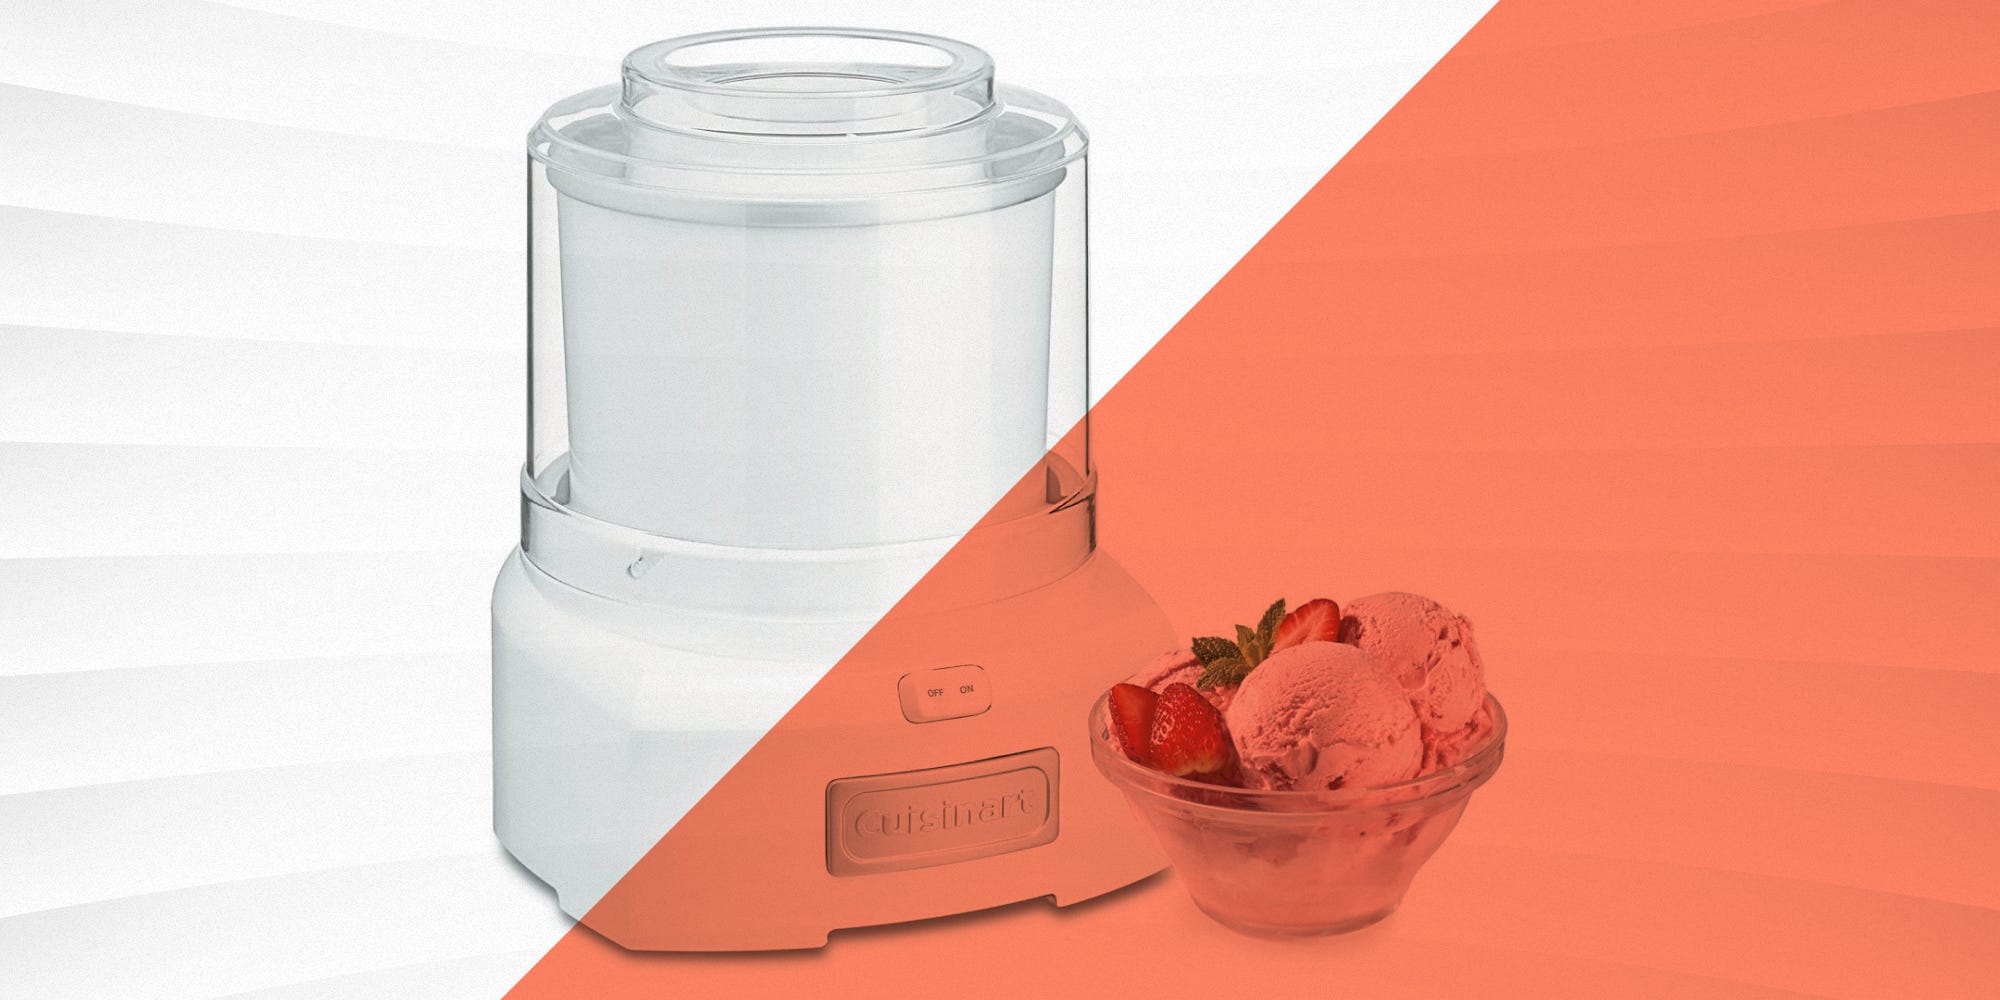 Make the Best Homemade Gelato, Sorbet, and More With These Awesome Ice Cream Makers